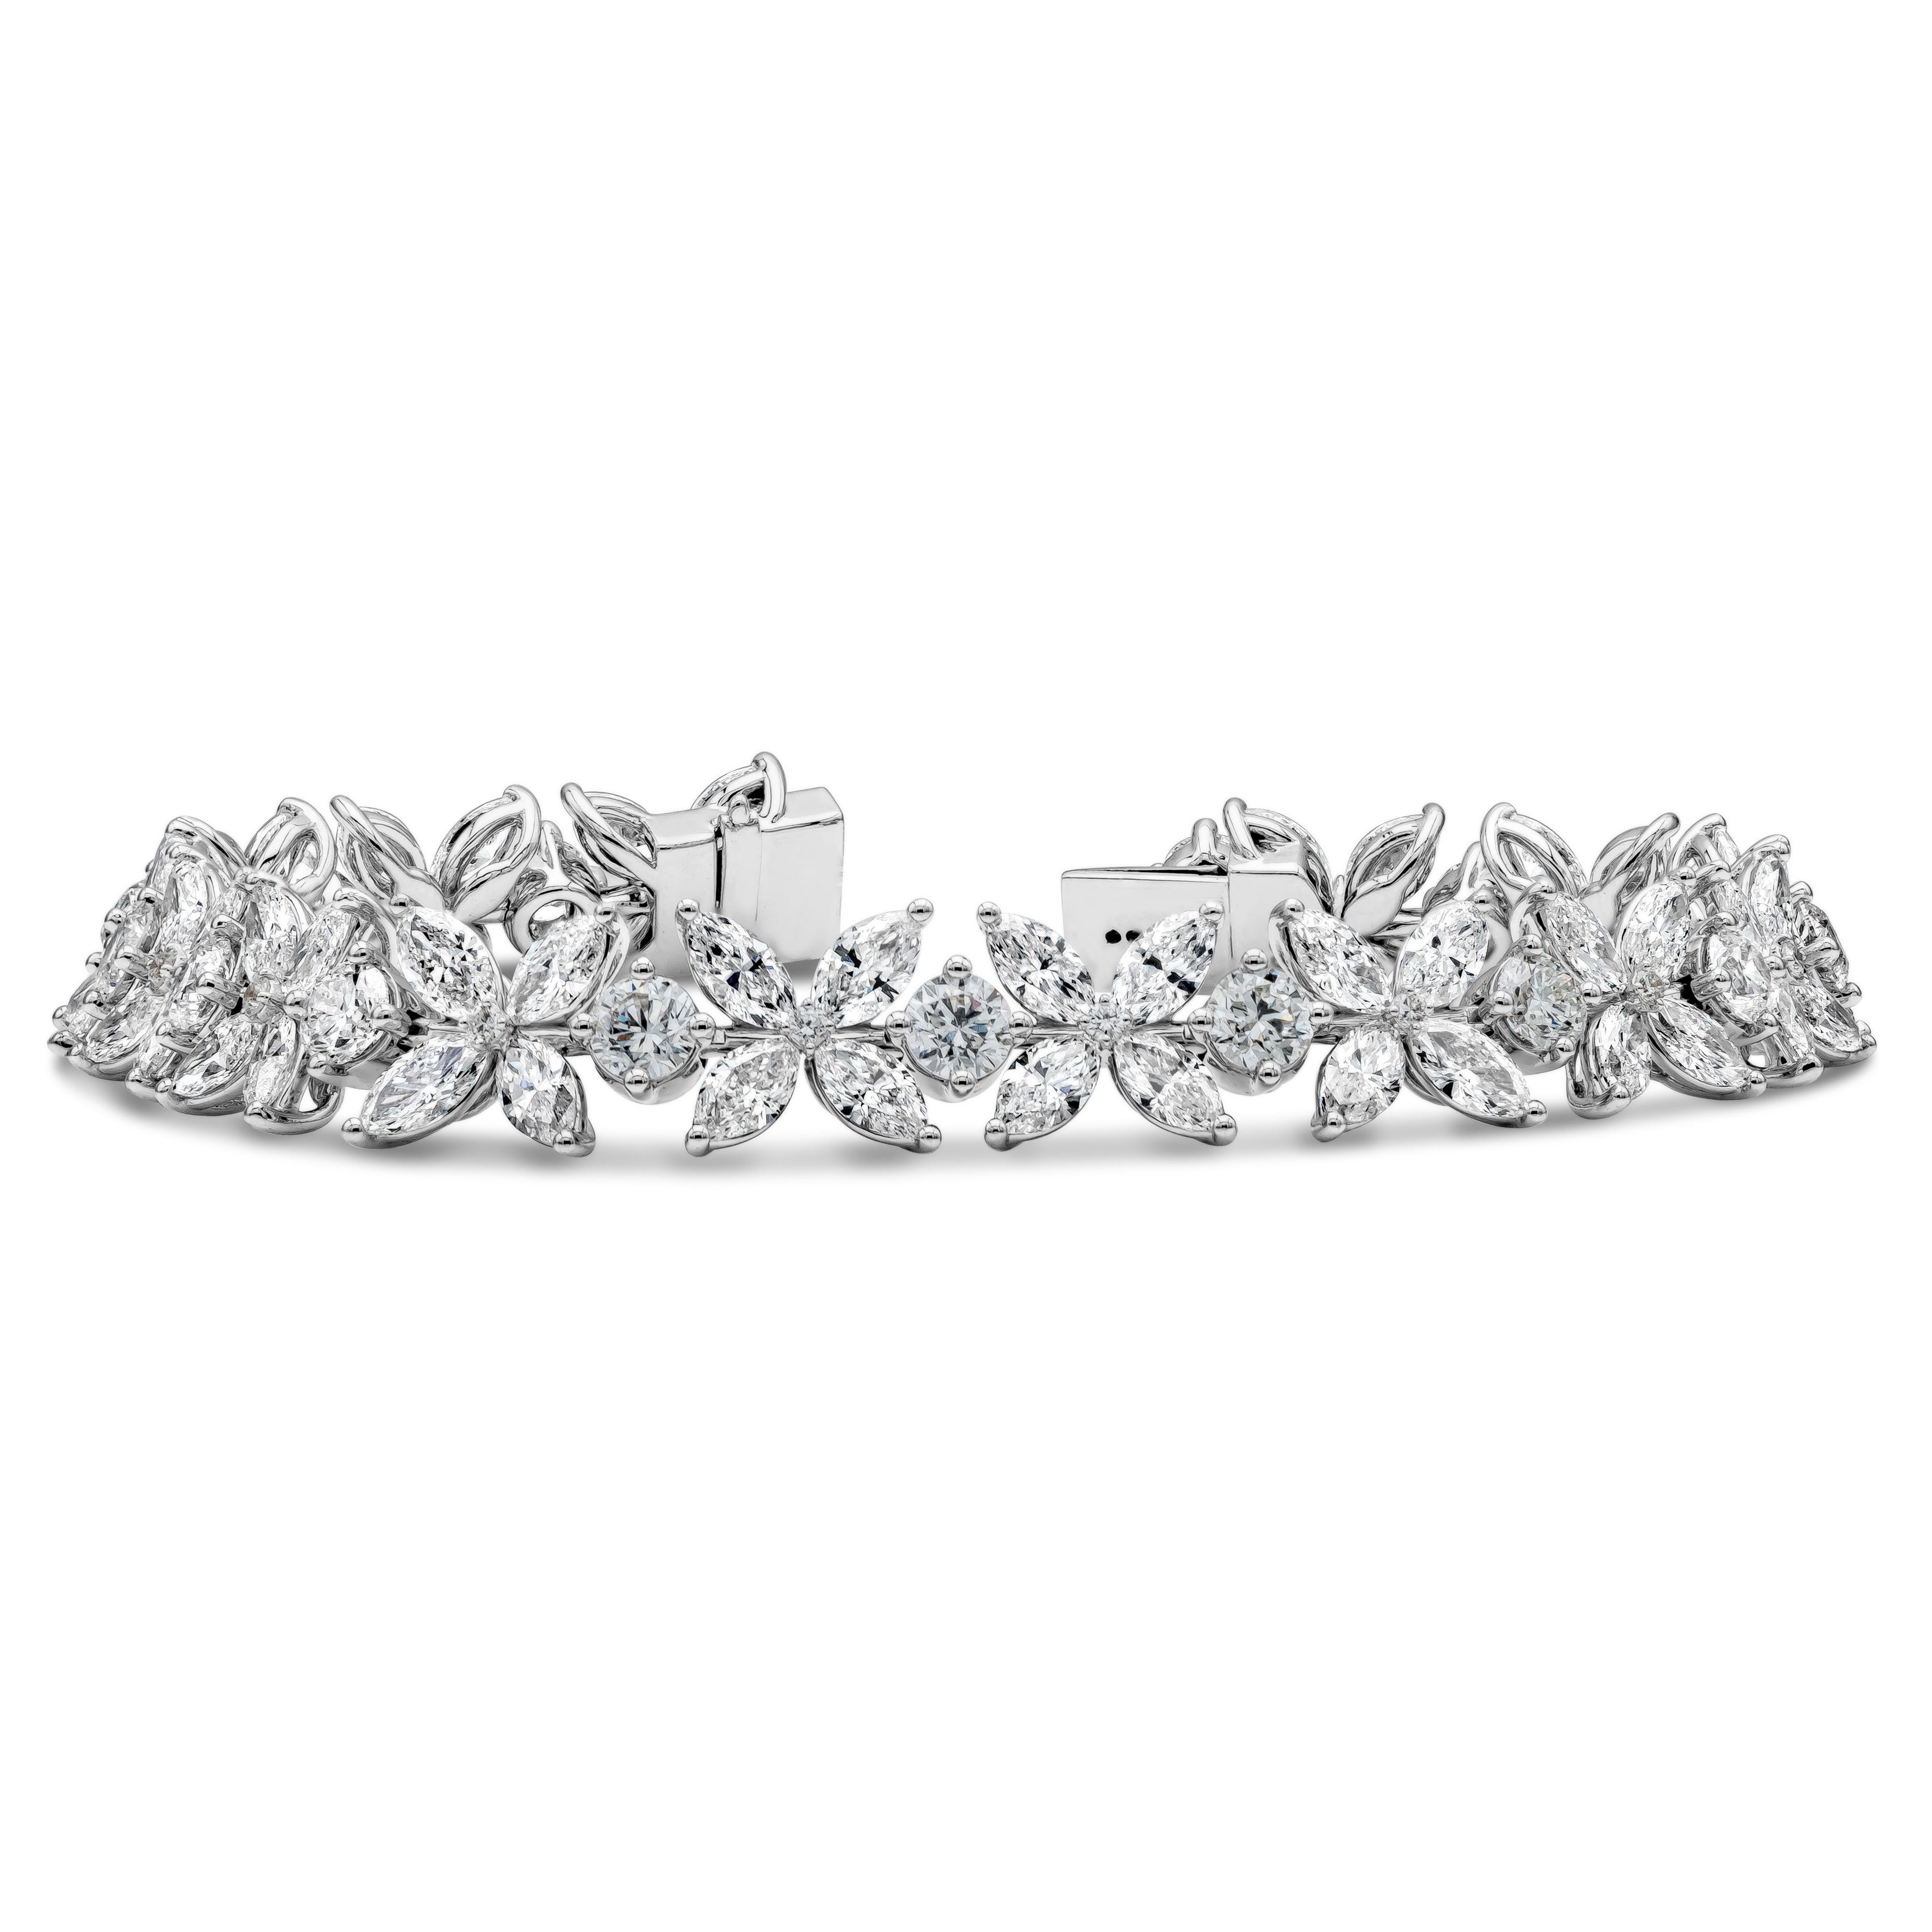 An elegant floral motif bracelet that showcases a cluster of marquise and round brilliant diamonds weighing 16.65 carats total. This bracelet can be assemble with another piece of bracelet to form an intricate design necklace. 7 inches in Length.